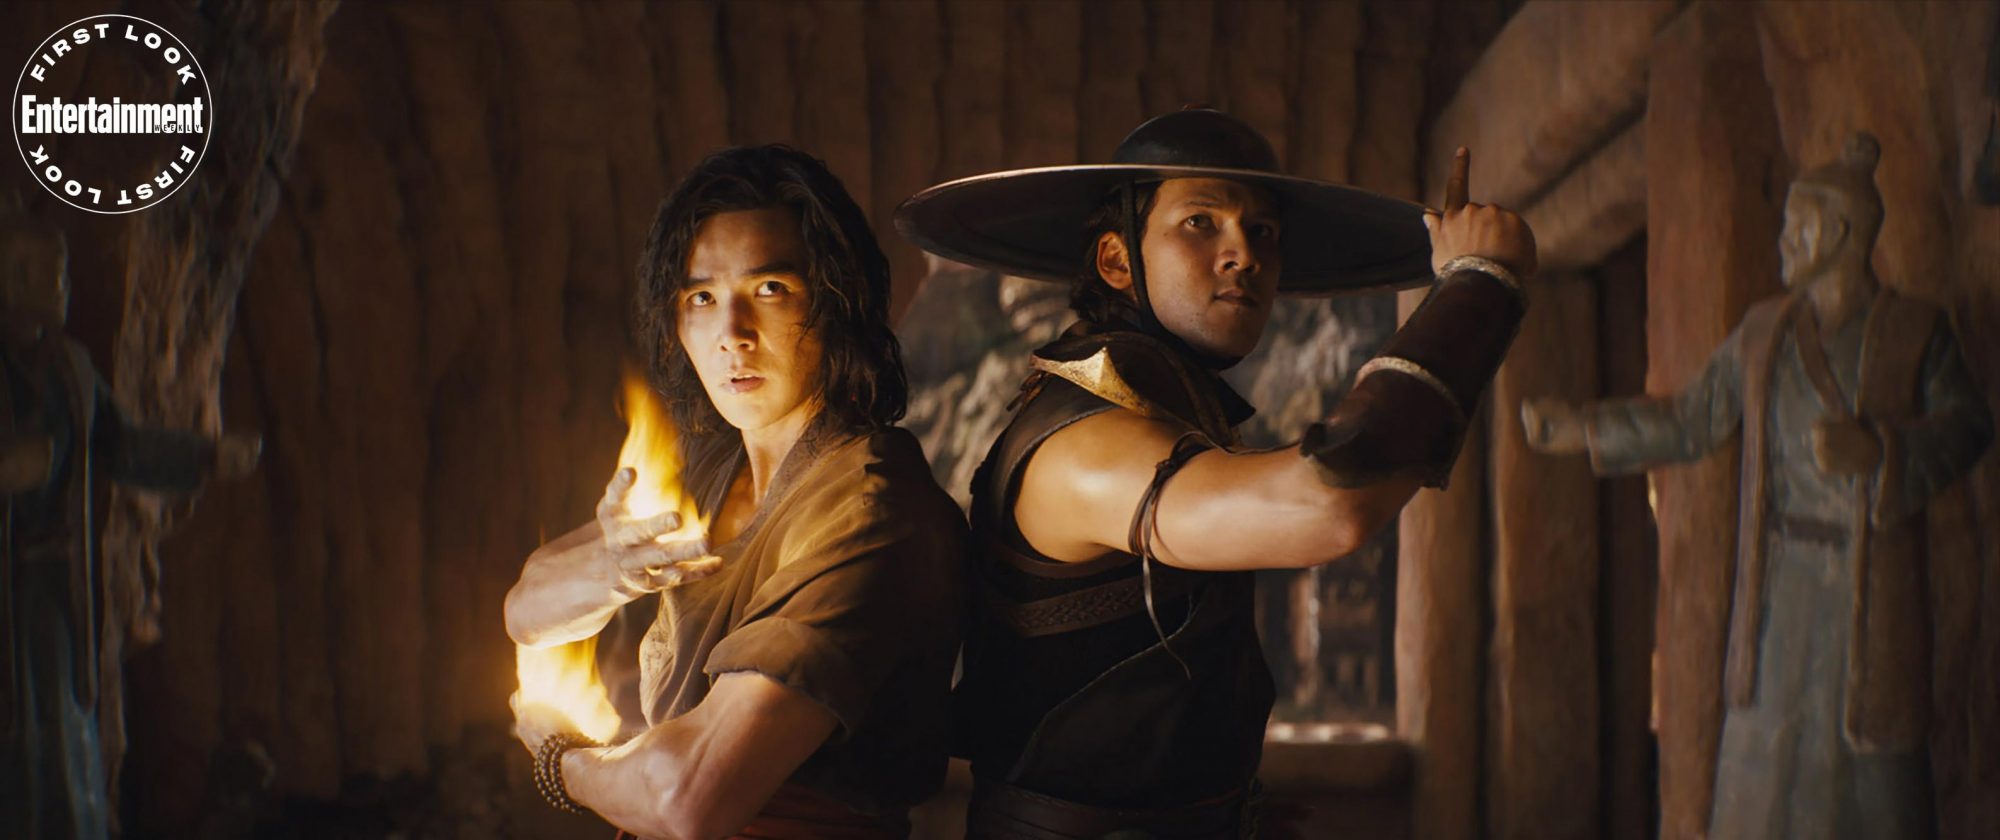 Mortal Kombat Legacy season 3 confirmed, Shang Tsung actor says he scared  crew member with his line delivery